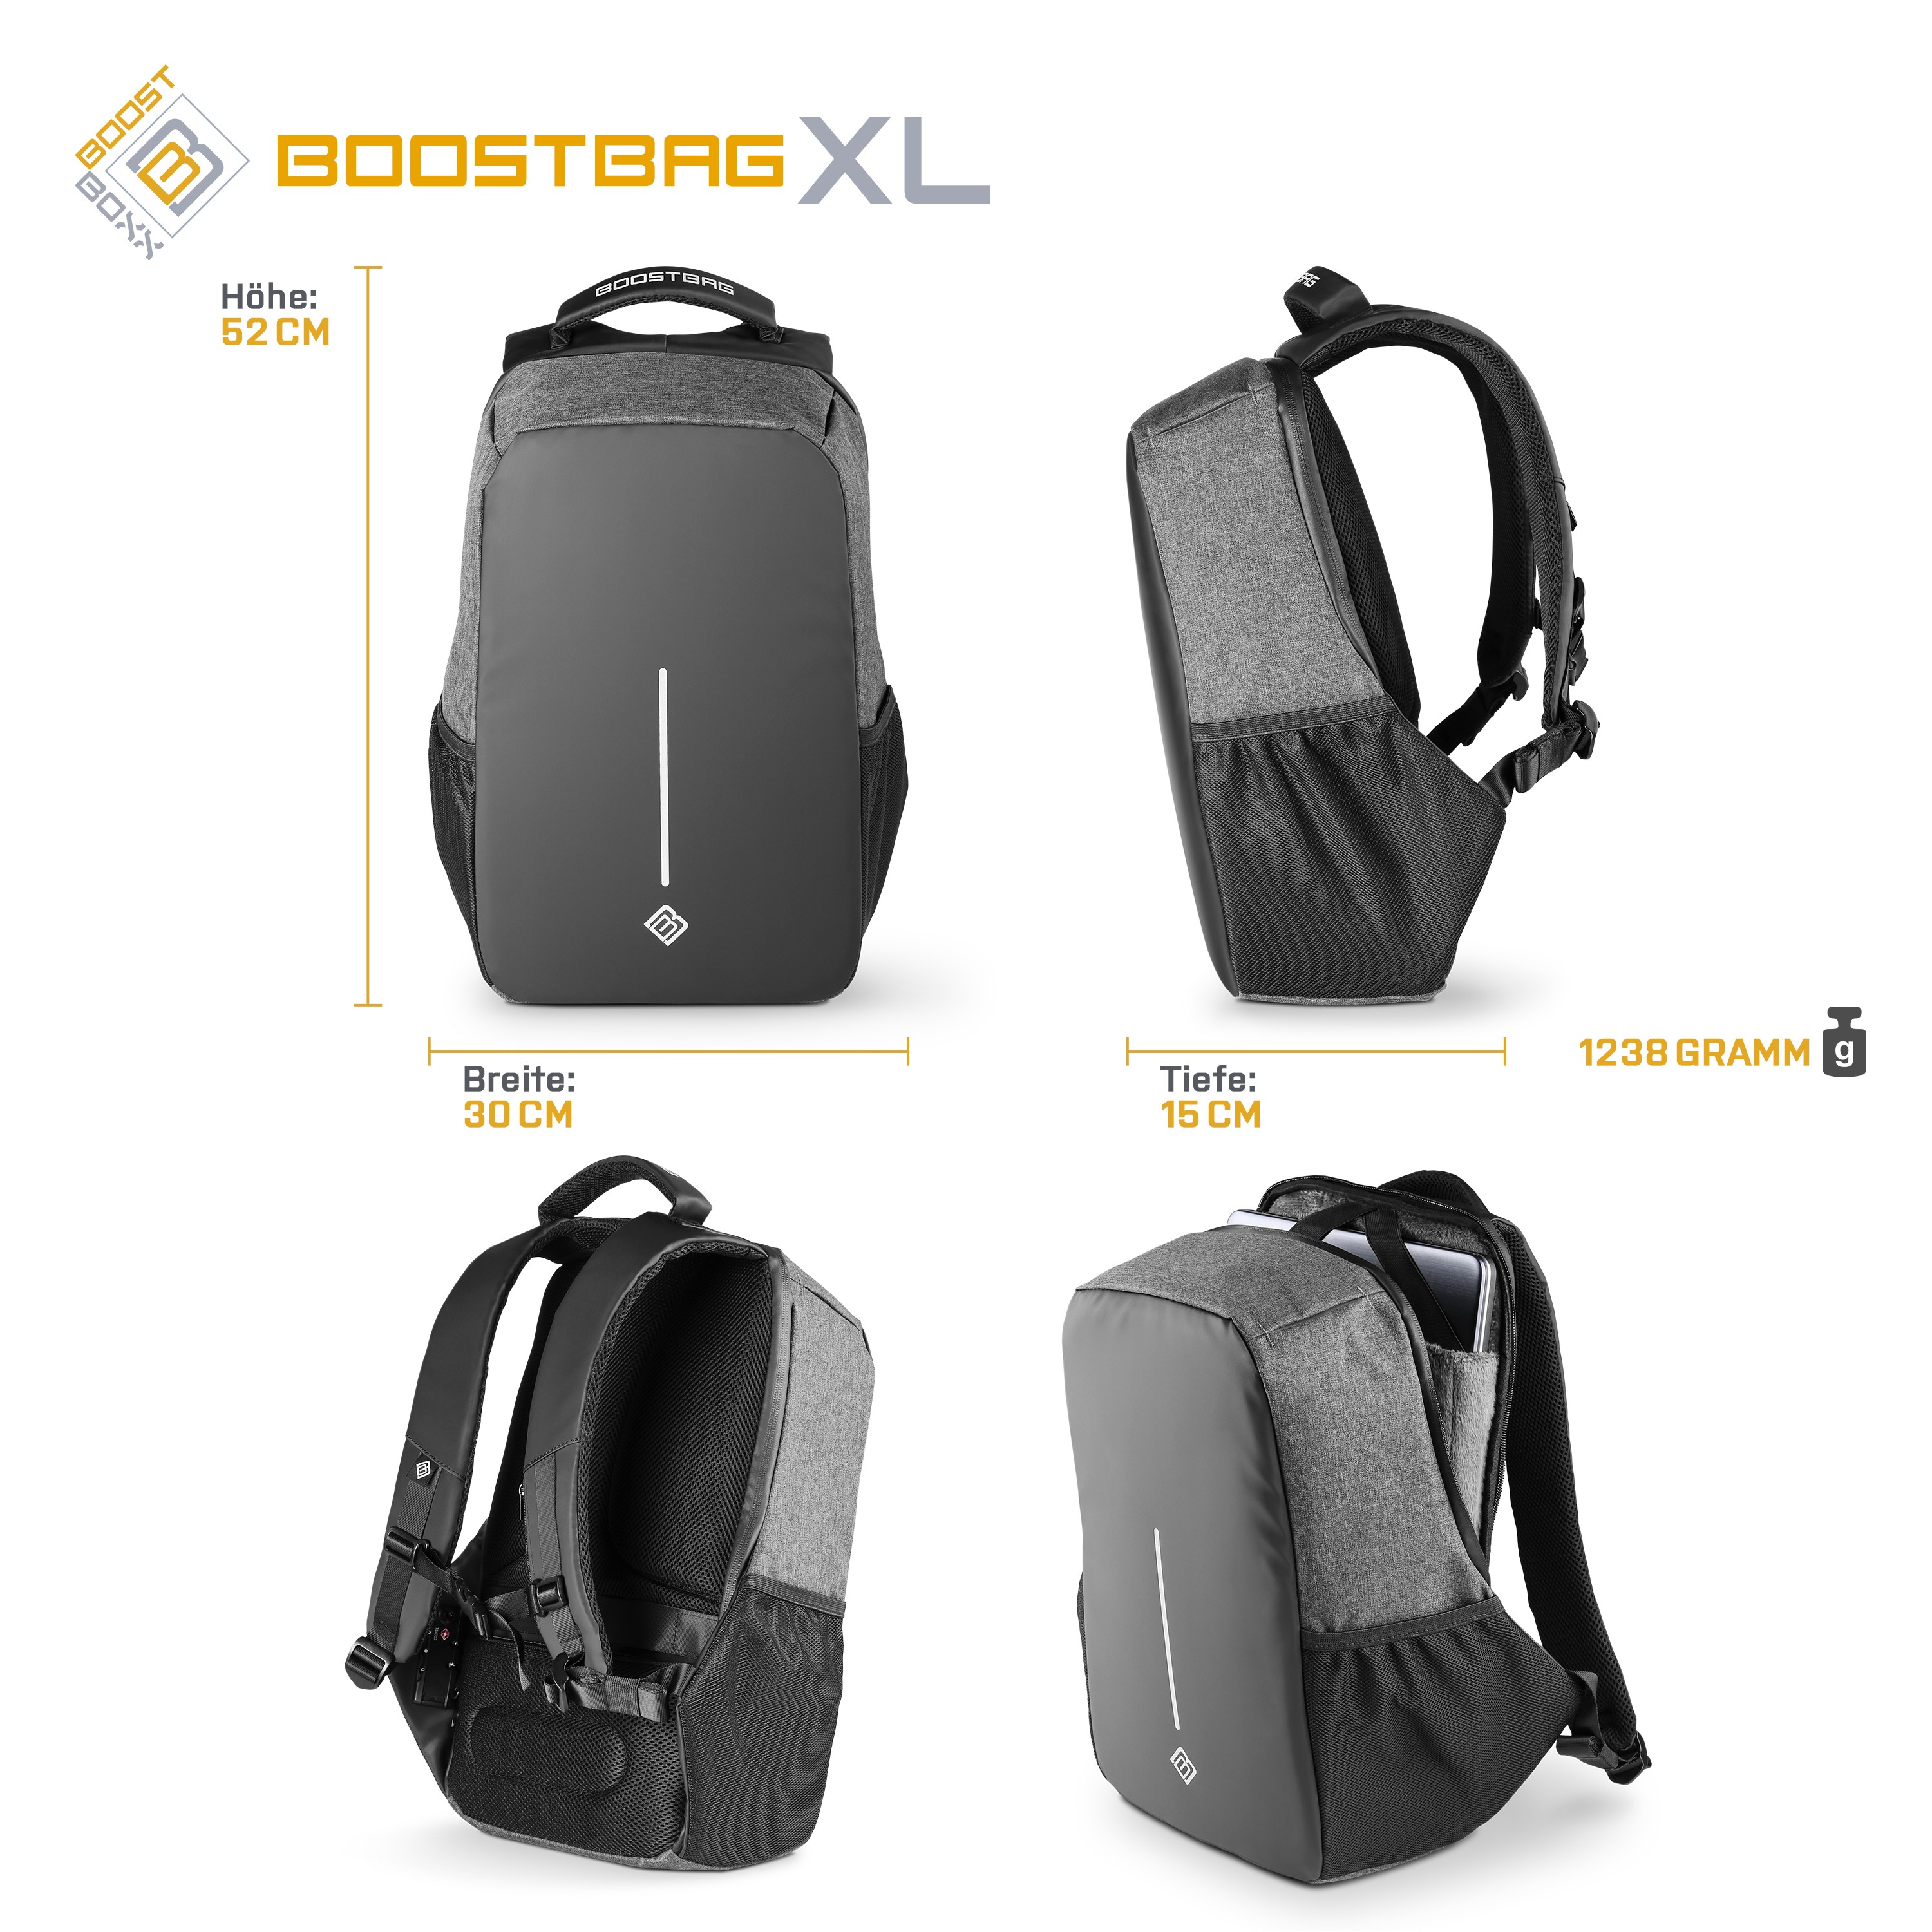 CSL Computer | BoostBoxx BoostBag XL - Notebook backpack up to 17